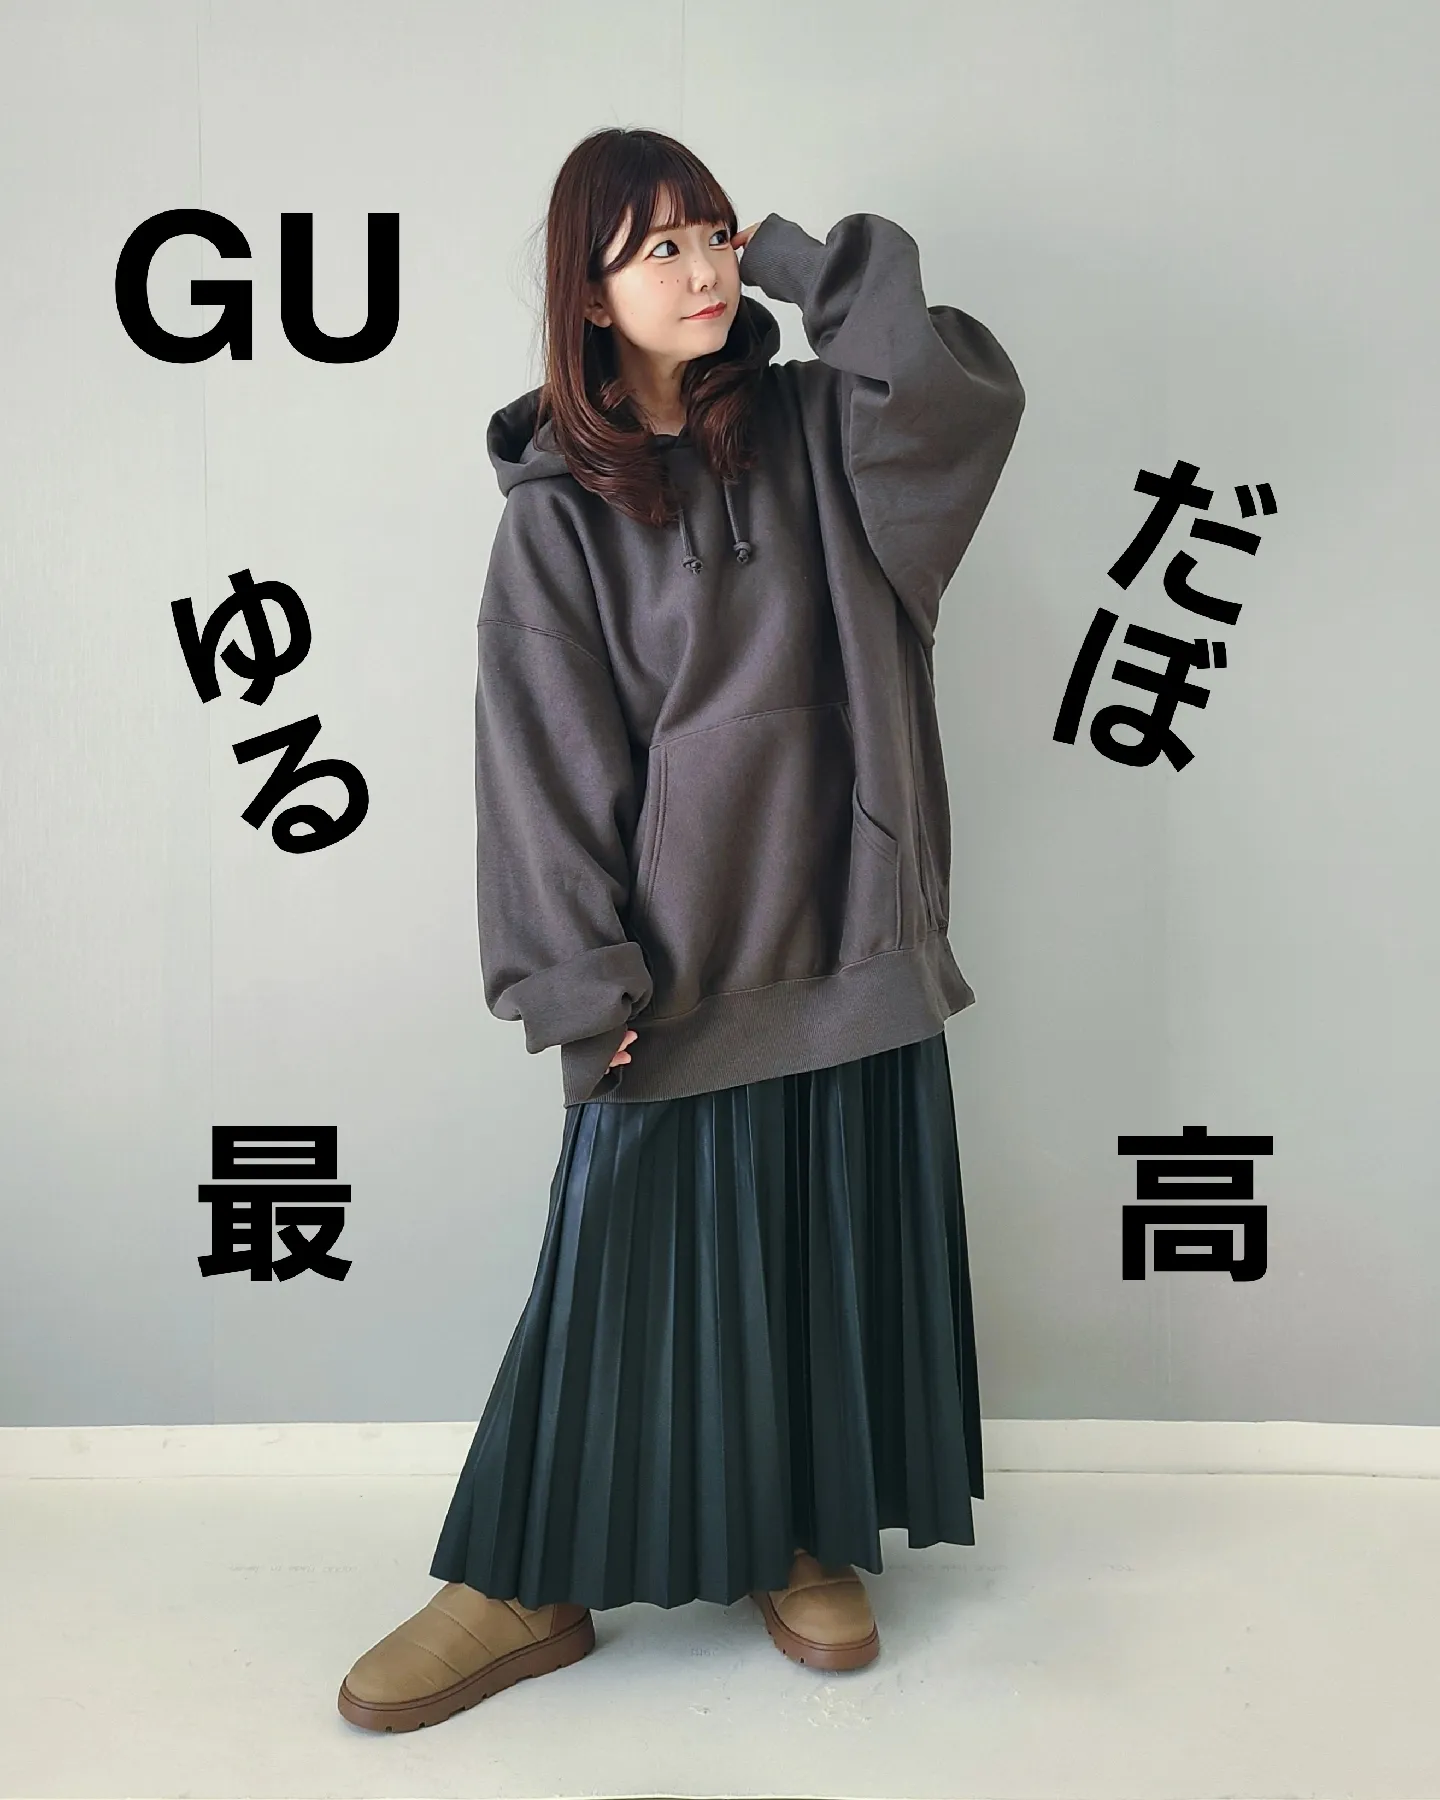 This loose body is the best ◎ You should buy 2 sizes up! GU's